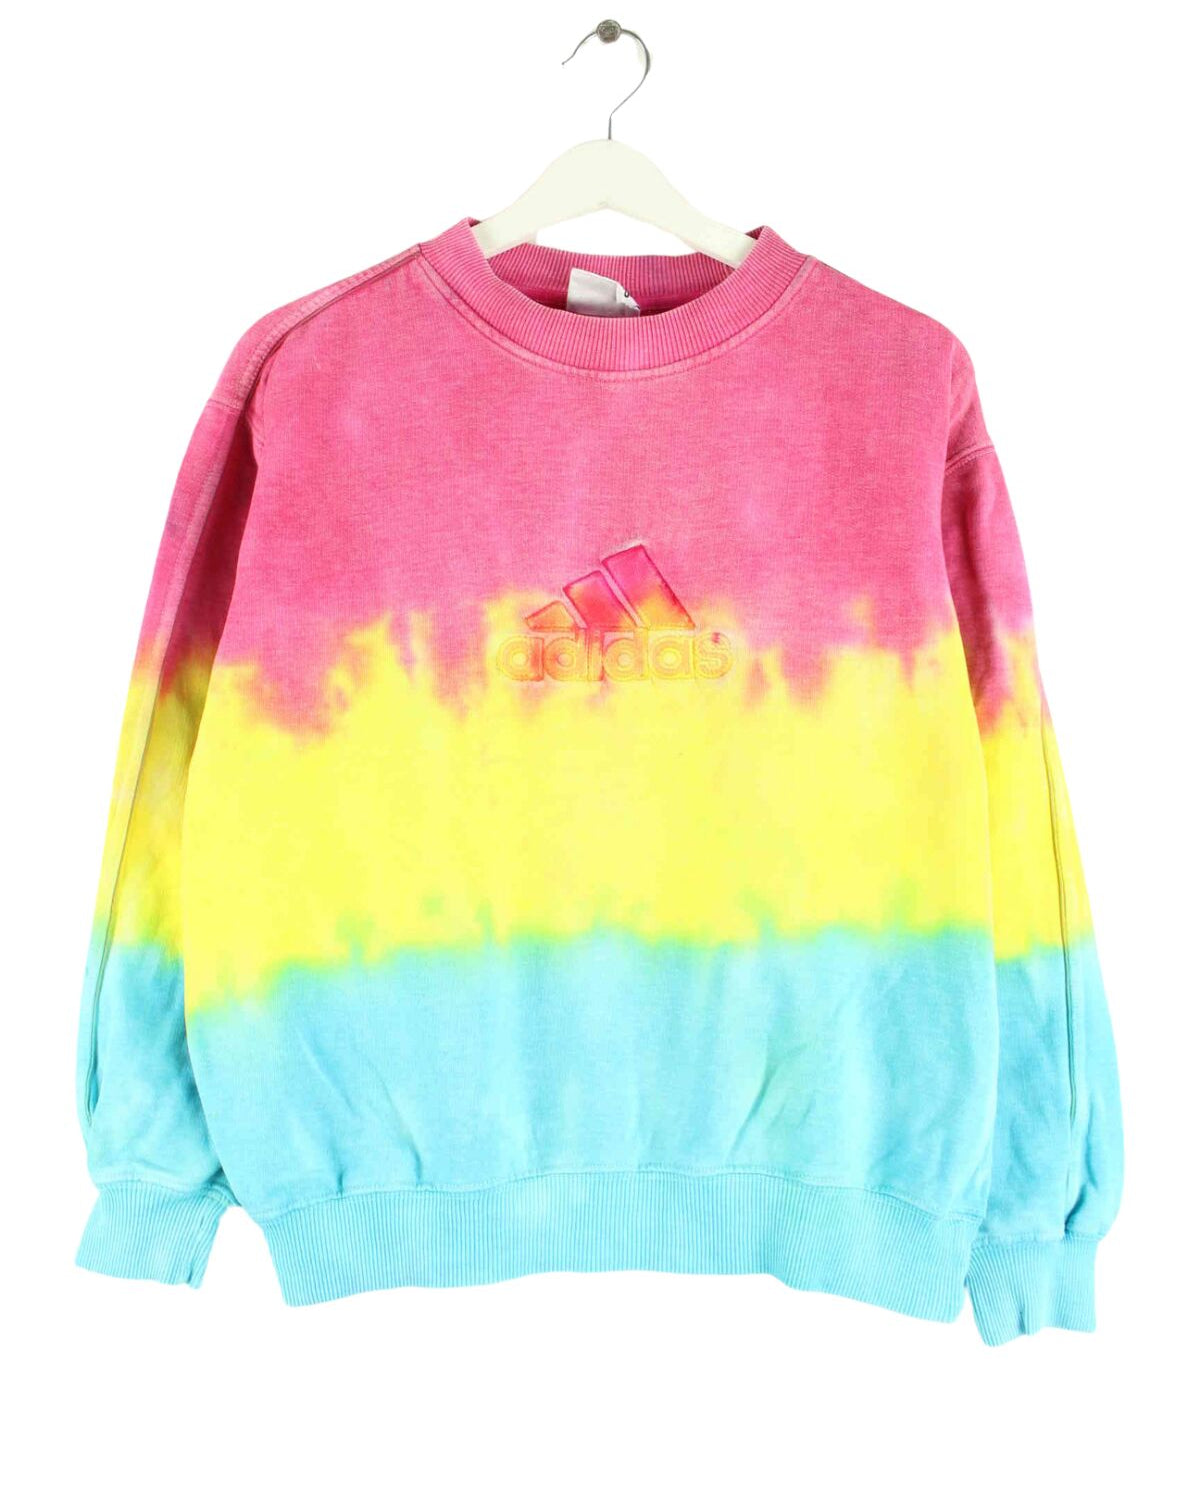 Adidas 90s Vintage Embroidered Tie Dye Sweater Mehrfarbig XS (front image)